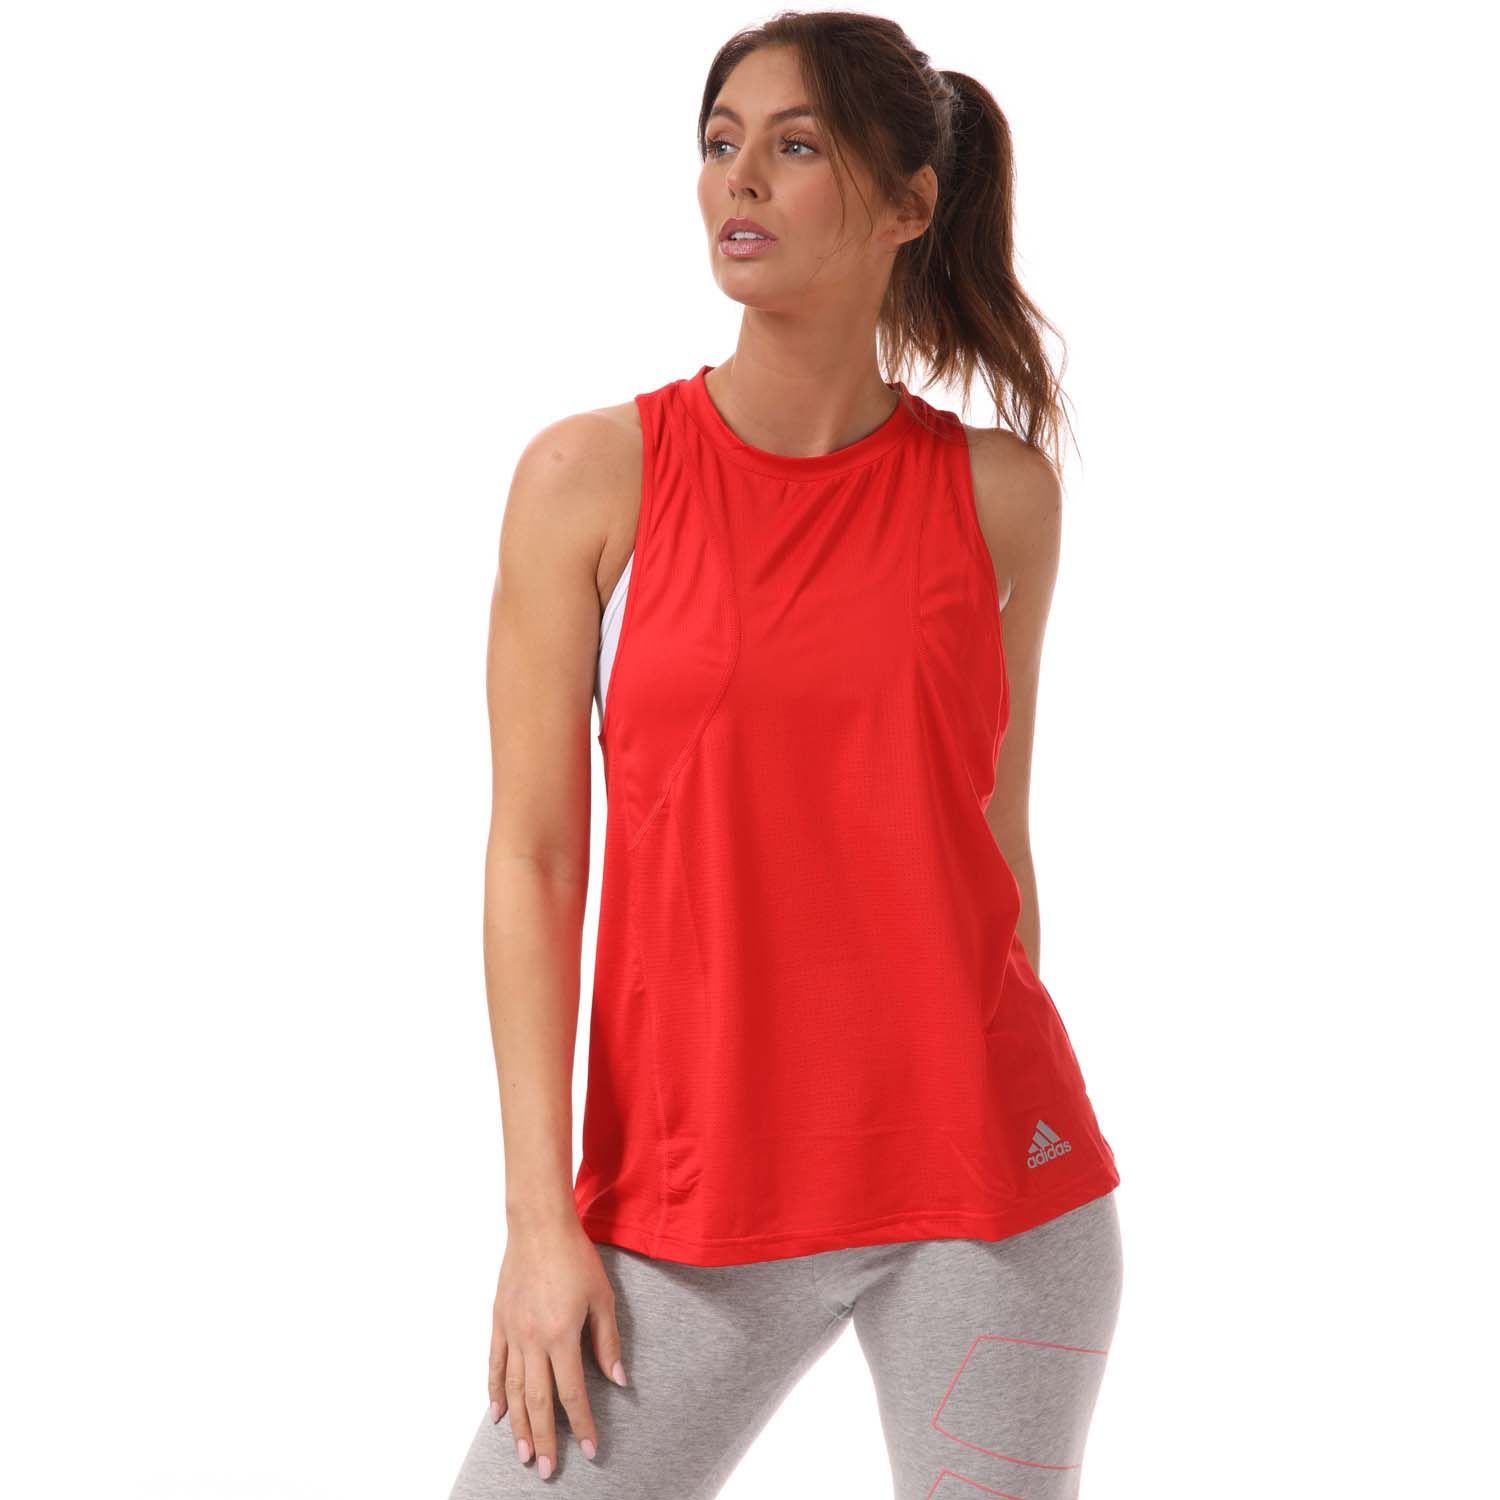 Women's adidas Own The Run Tank Top in Red